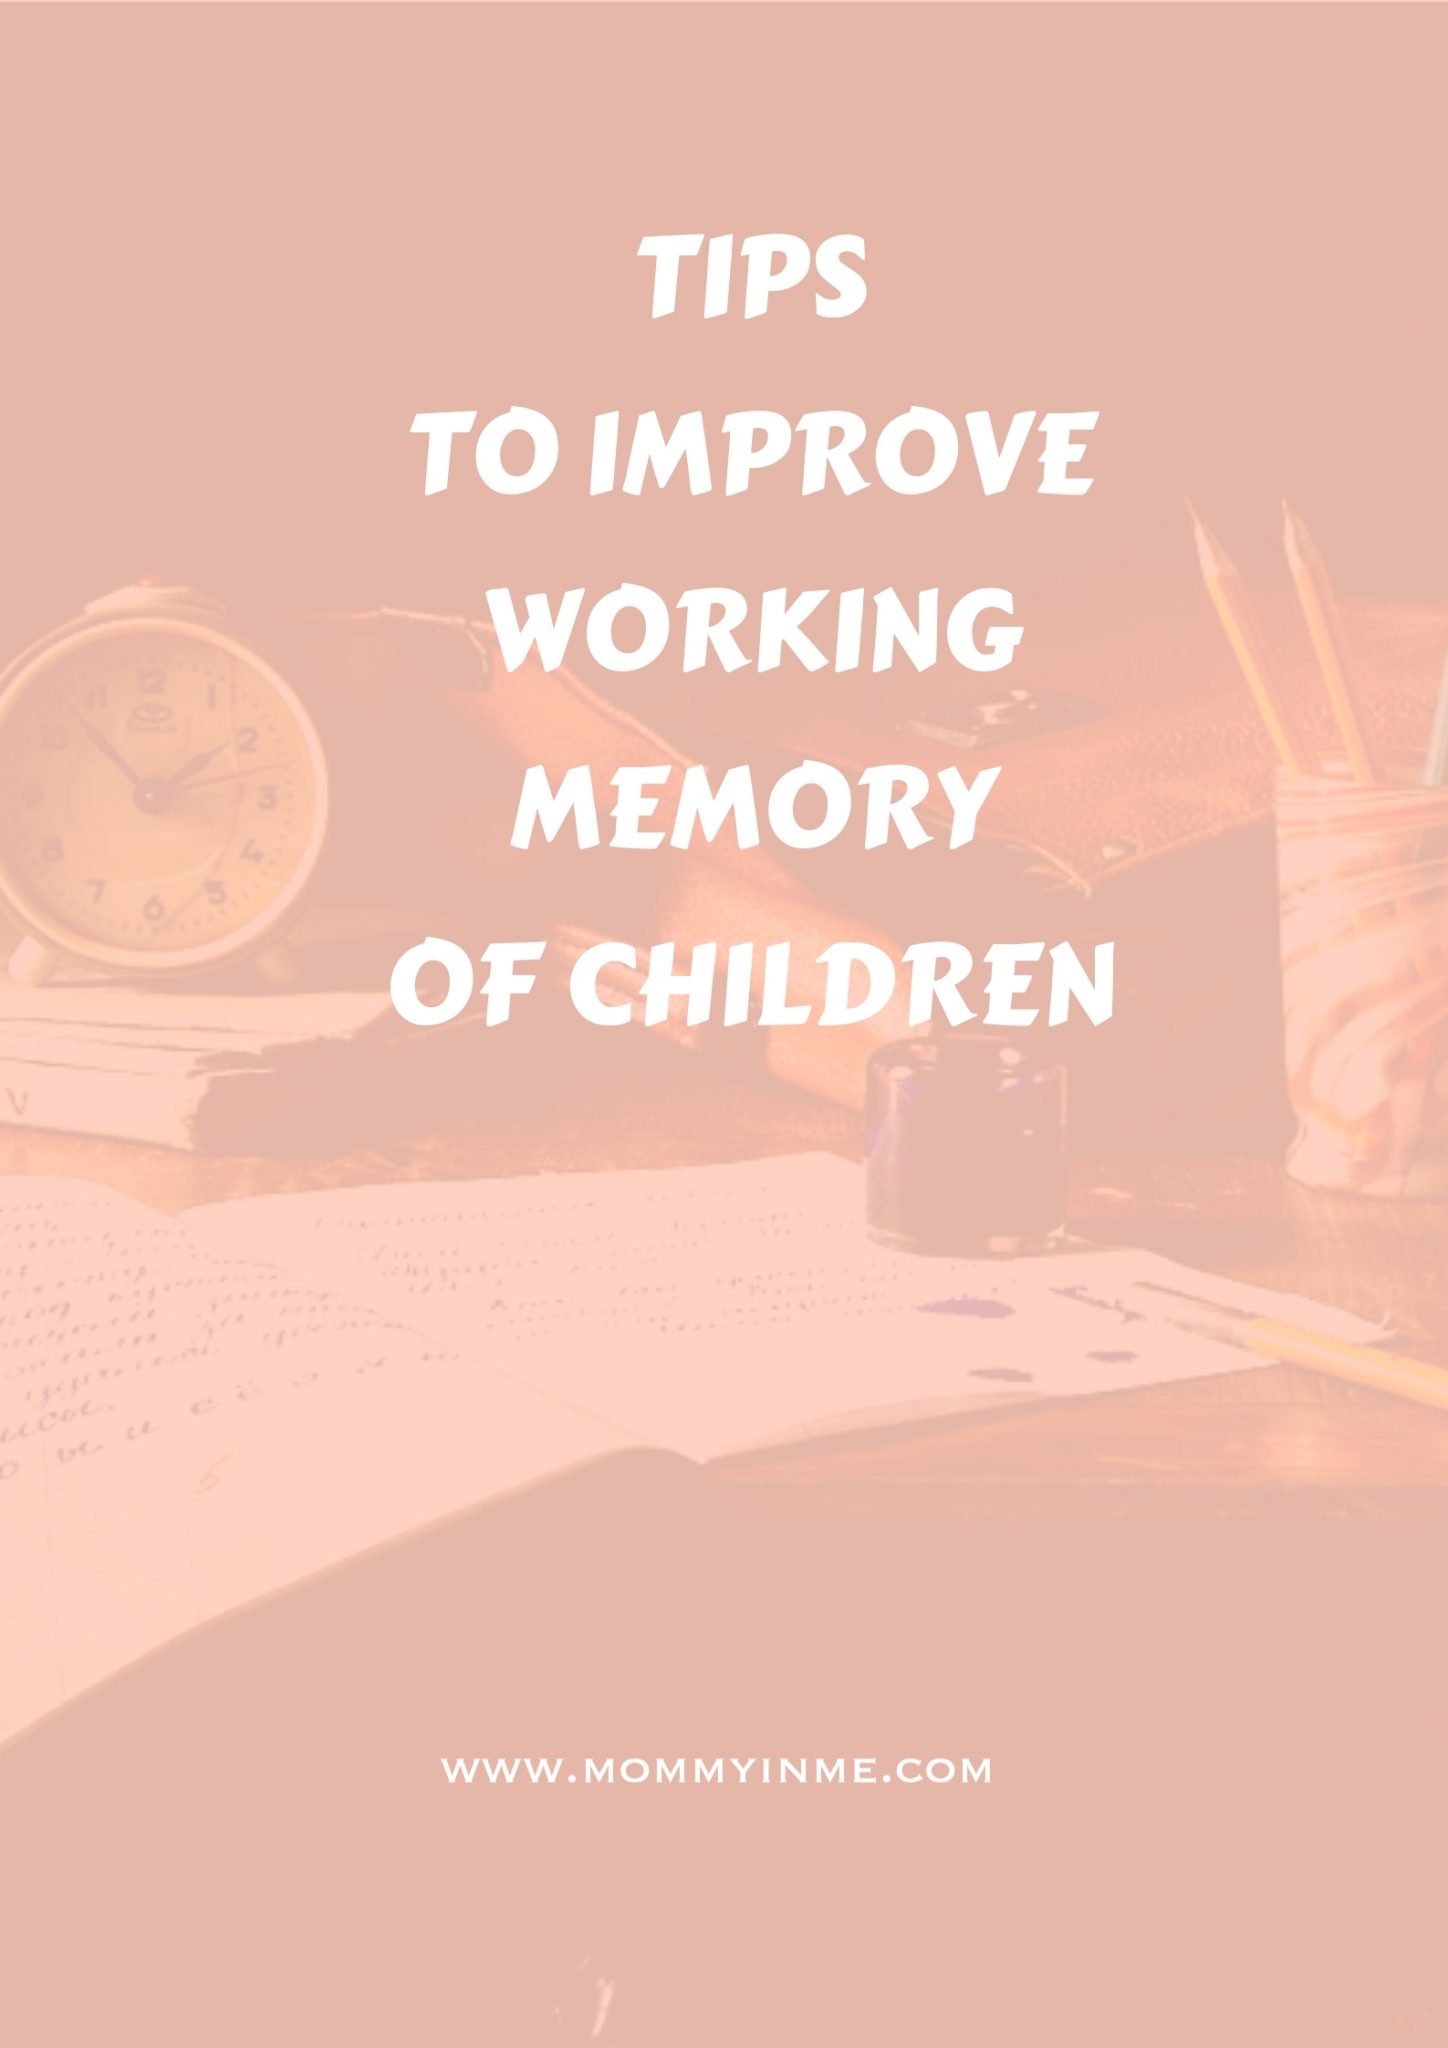 Tips to increase the working memory and concentration in children. Must read as a parent. #memory #concentration #parentingtips 